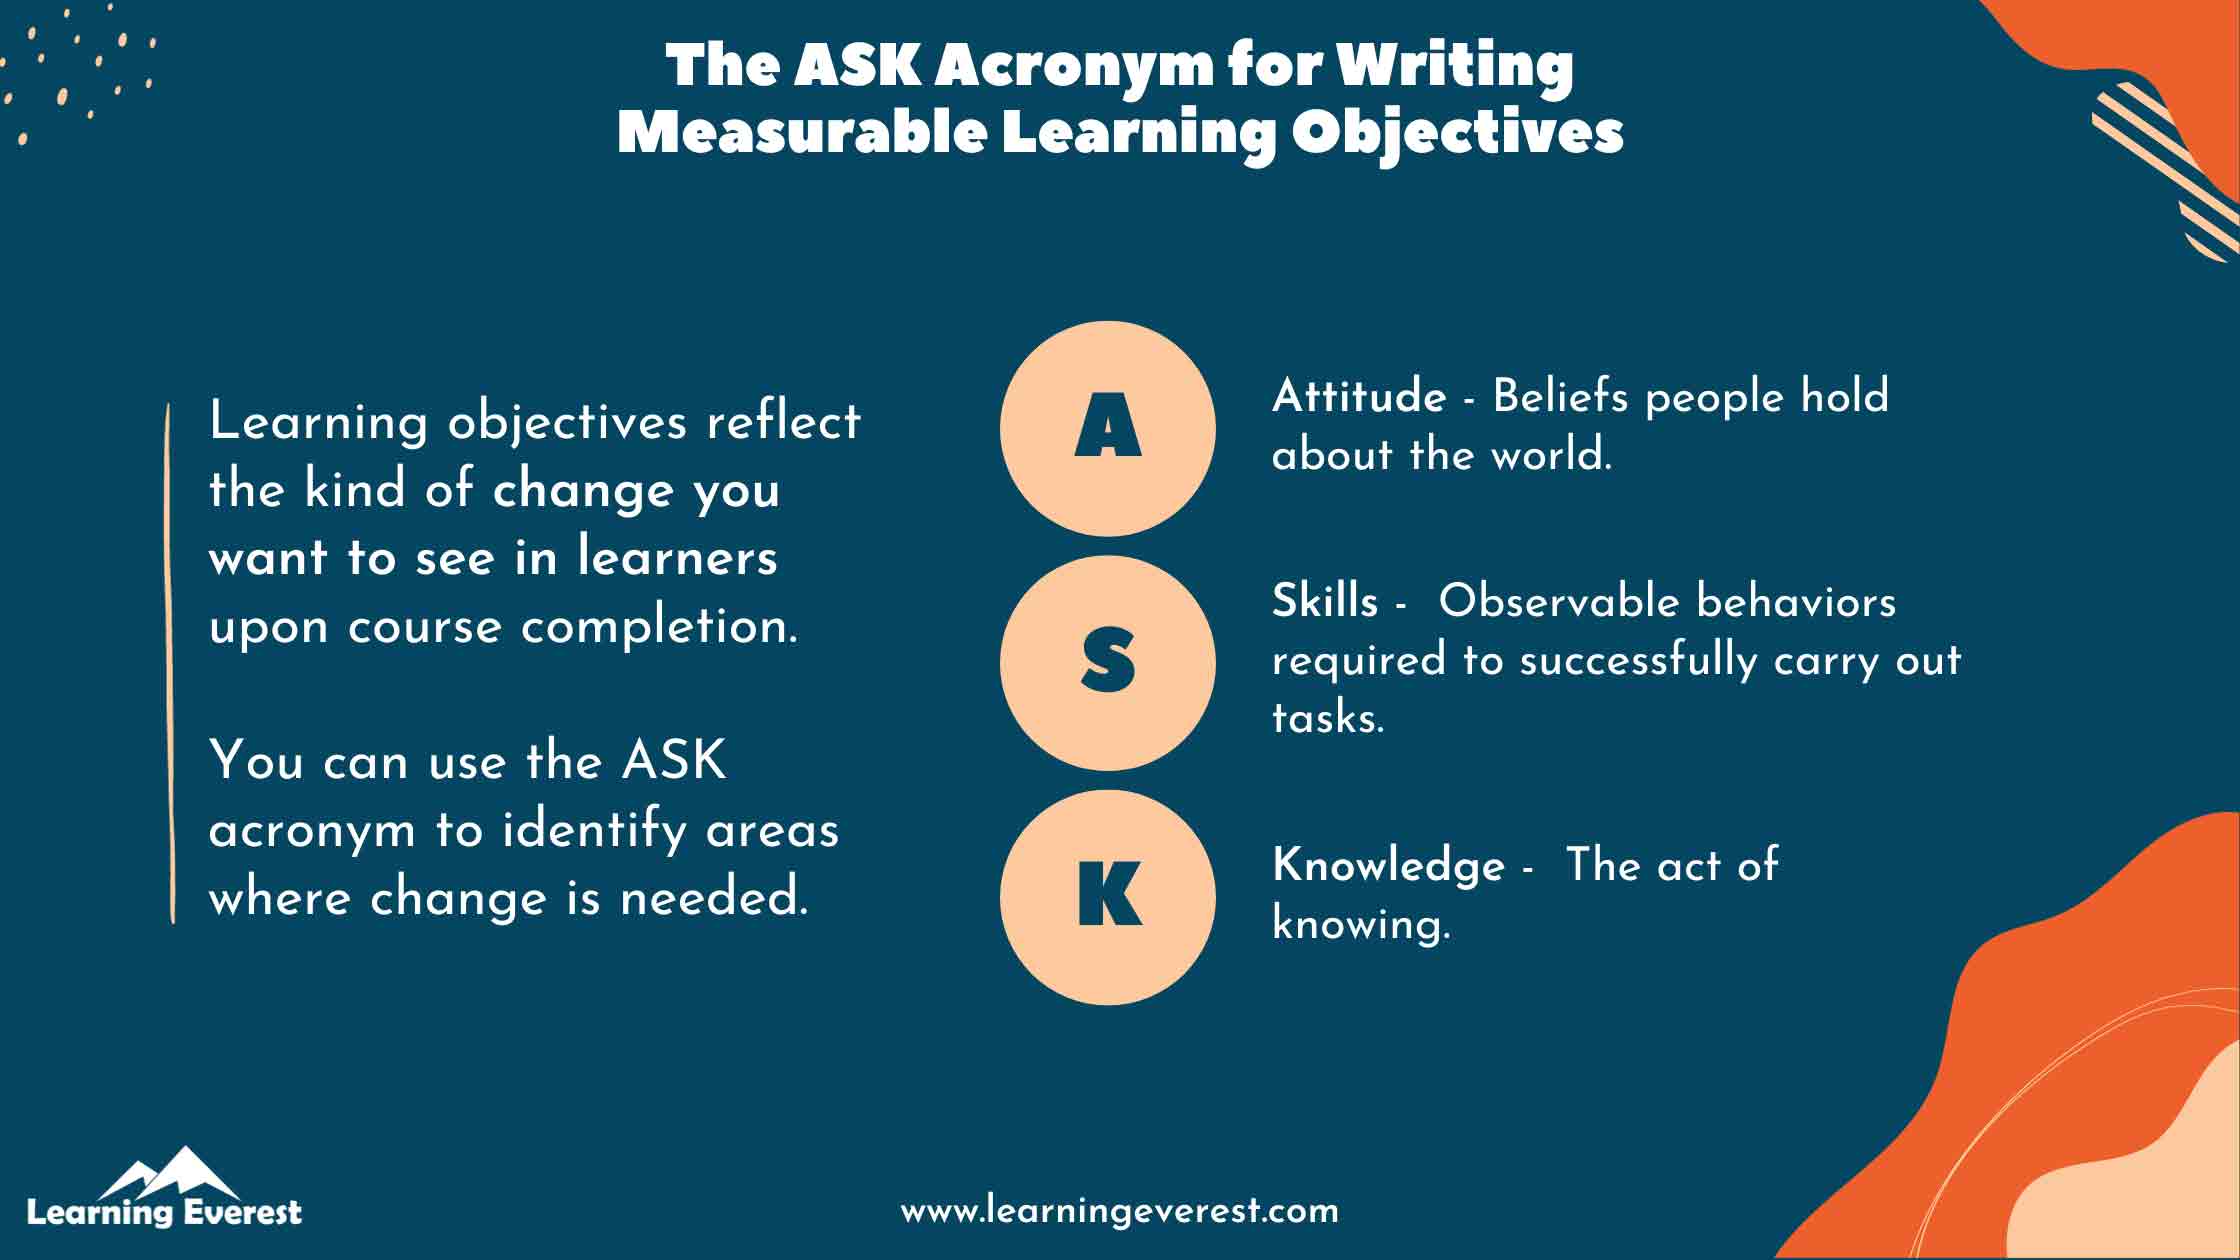 The ASK Acronym for Writing Measurable Learning Objectives